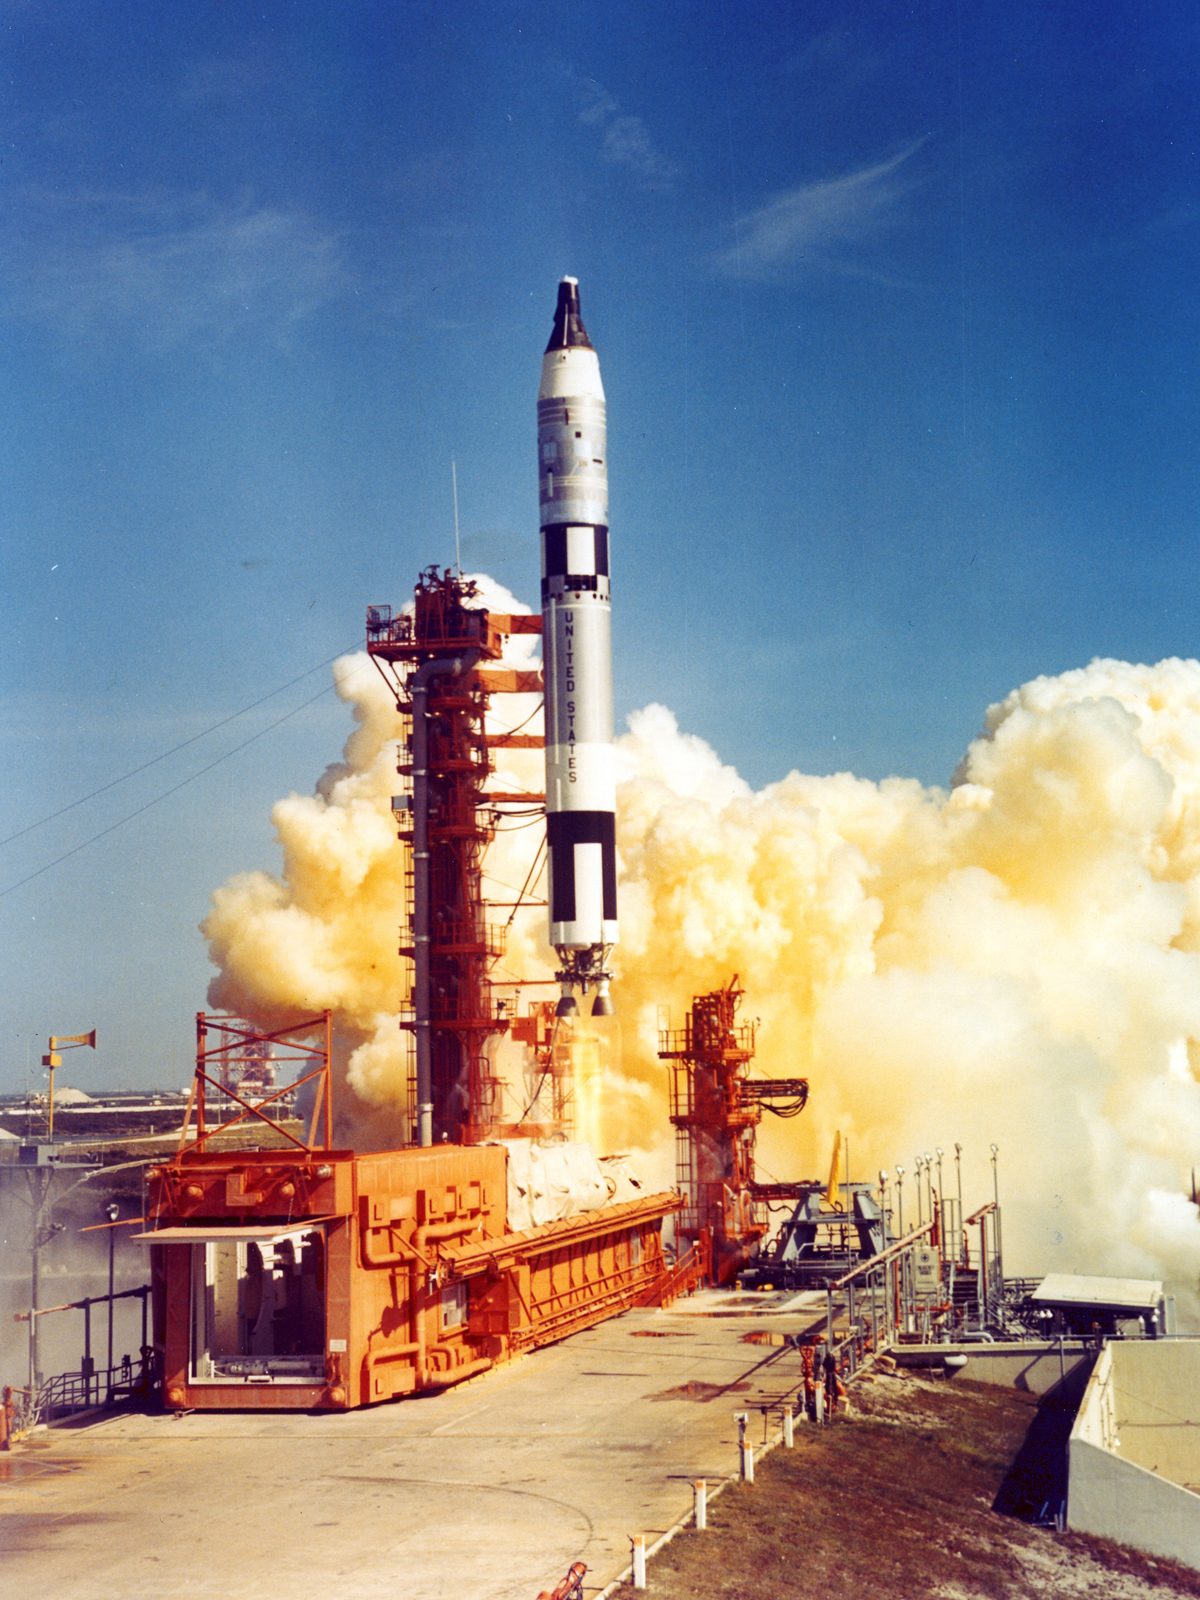 Gemini VIII lifts off from Launch Complex 19, Kennedy Space Center, 17:41:02 UTC, 16 March 1966. (NASA)